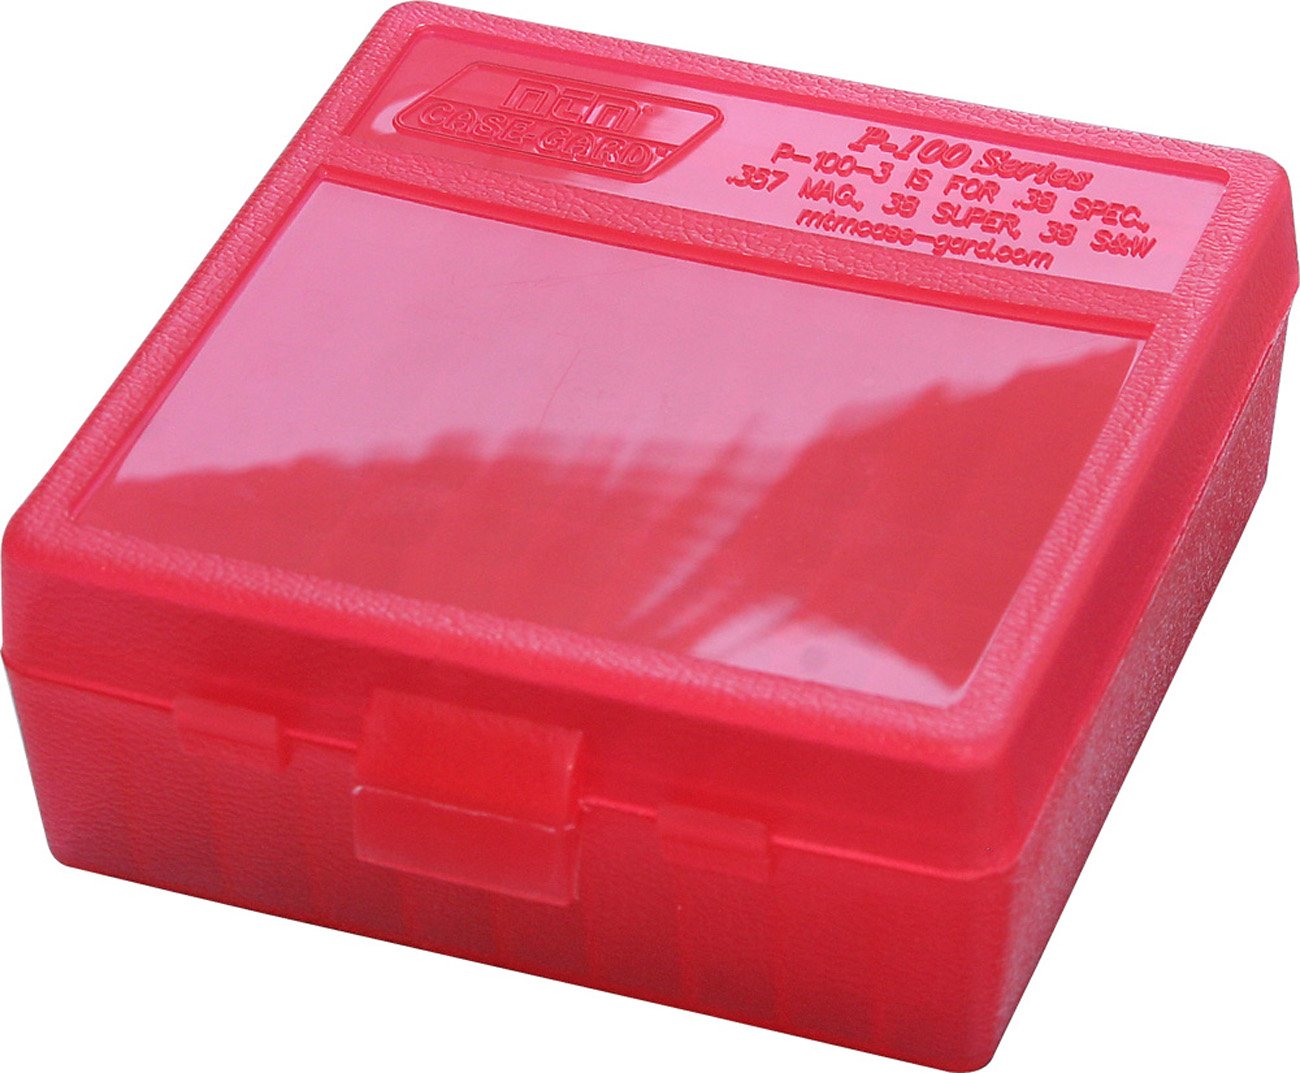 MTM 100 Round Flip-Top Ammo Box 38/357 Cal (Clear Red)